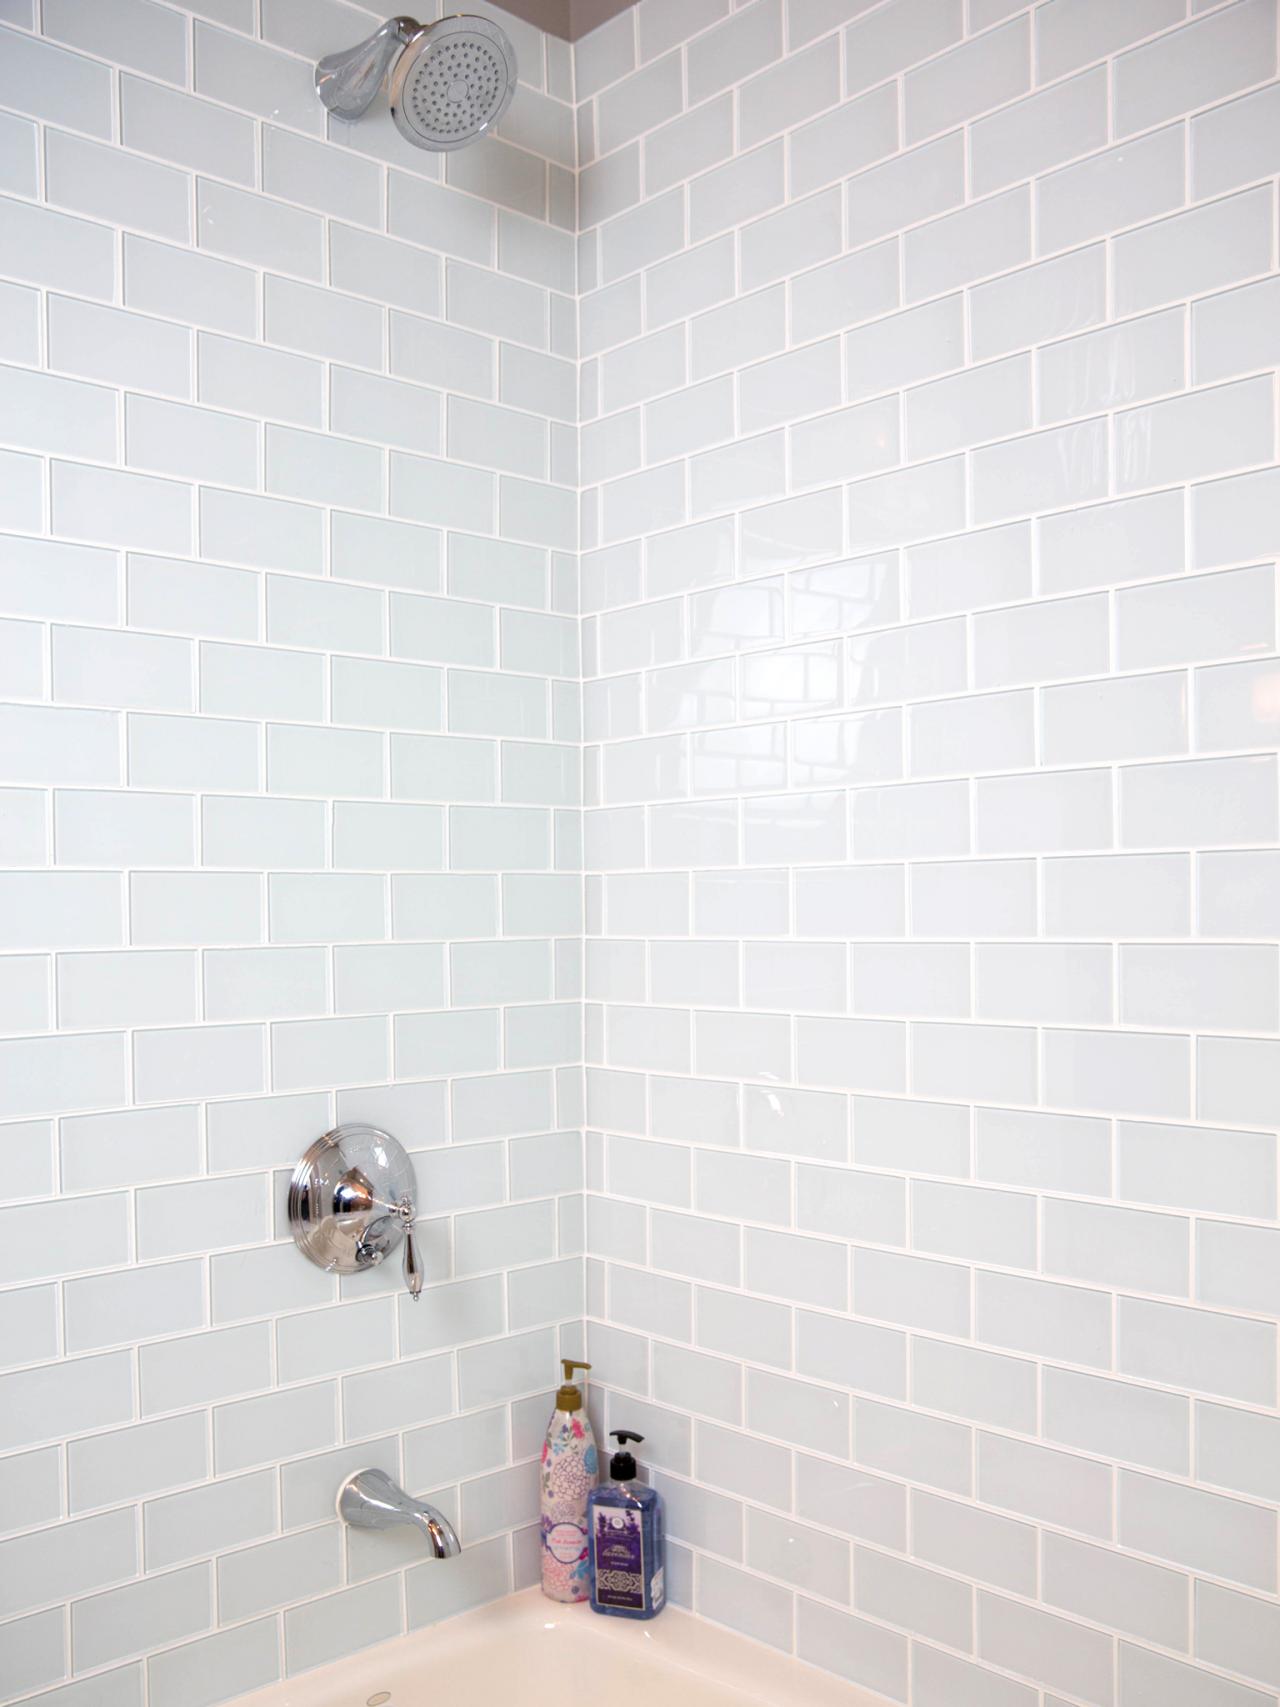 How To Install A Shower Tile Wall, Backer Board For Shower Tile Install